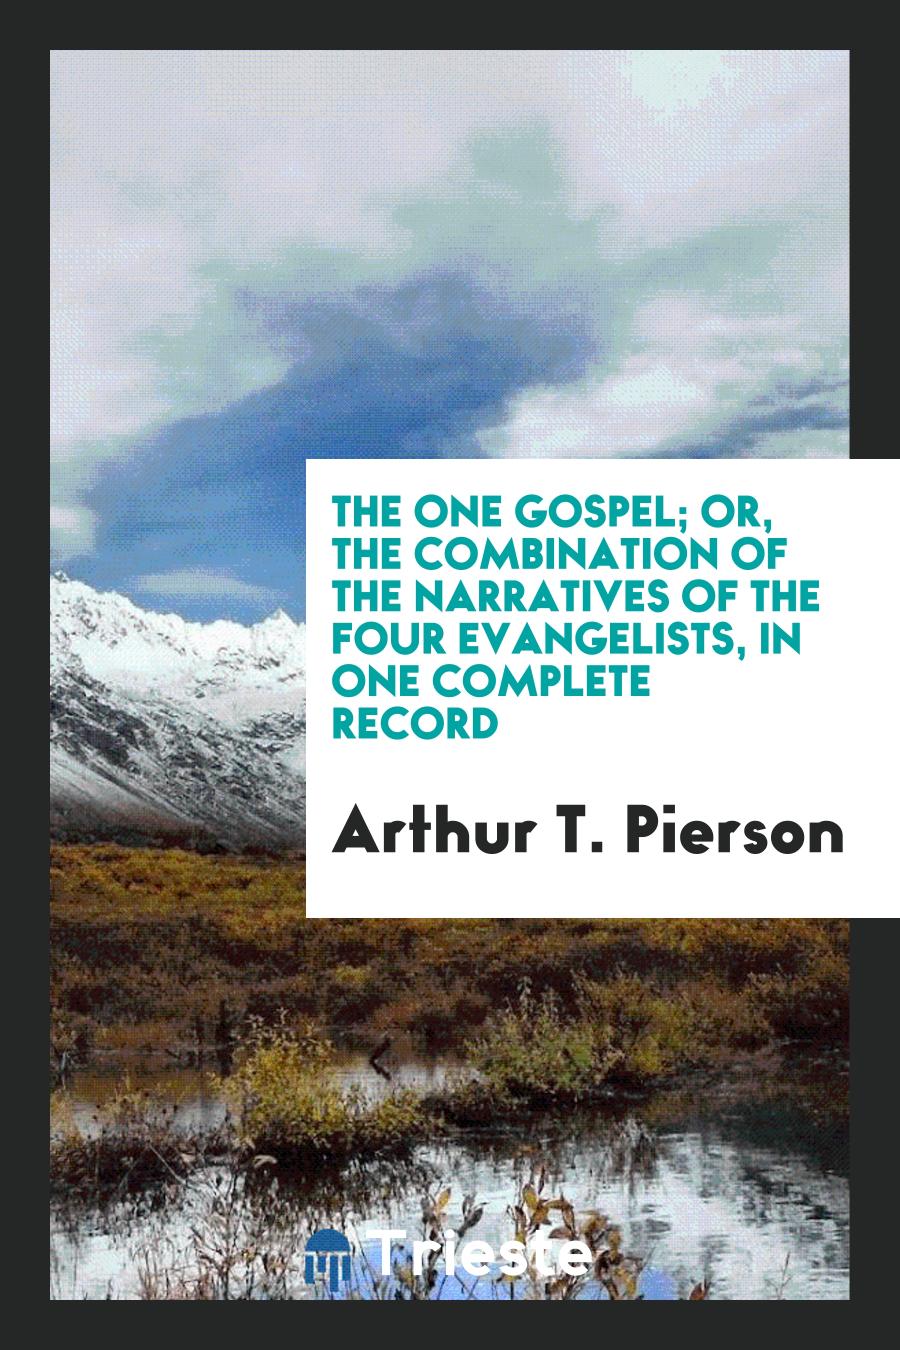 The One Gospel; Or, The Combination of the Narratives of the Four Evangelists, in One Complete Record